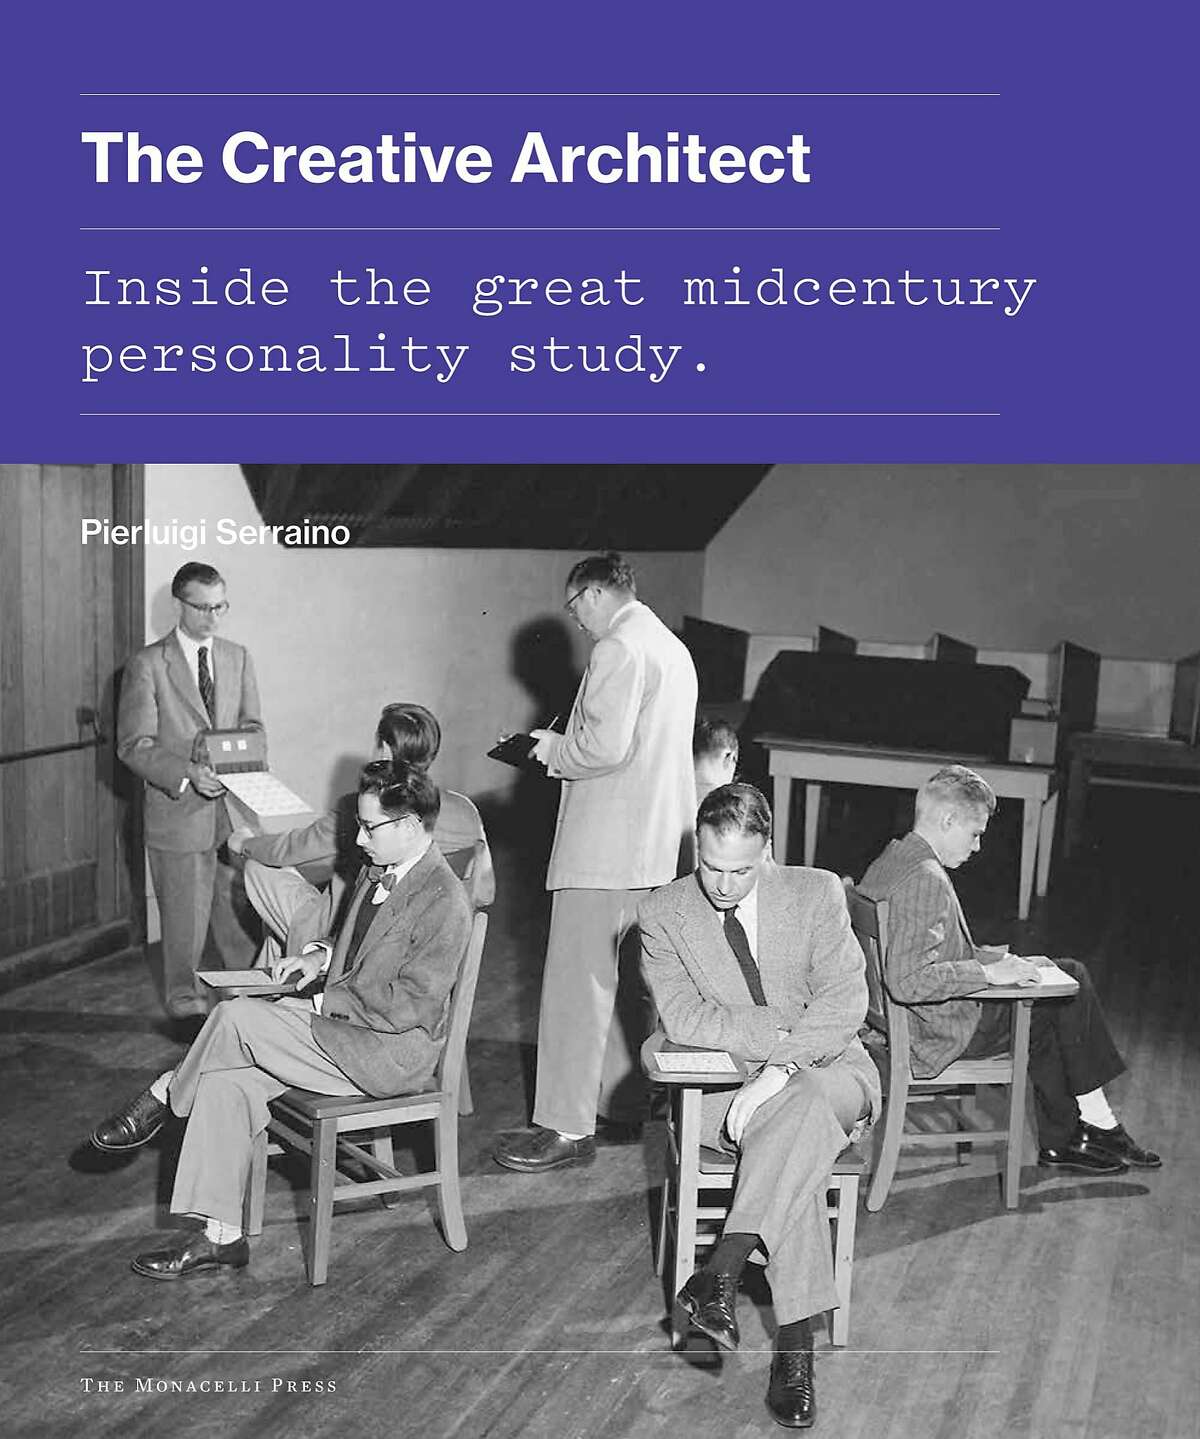 "The Creative Architect: The Great Midcentury Personality Study," was published in 2016 by Monicelli Press